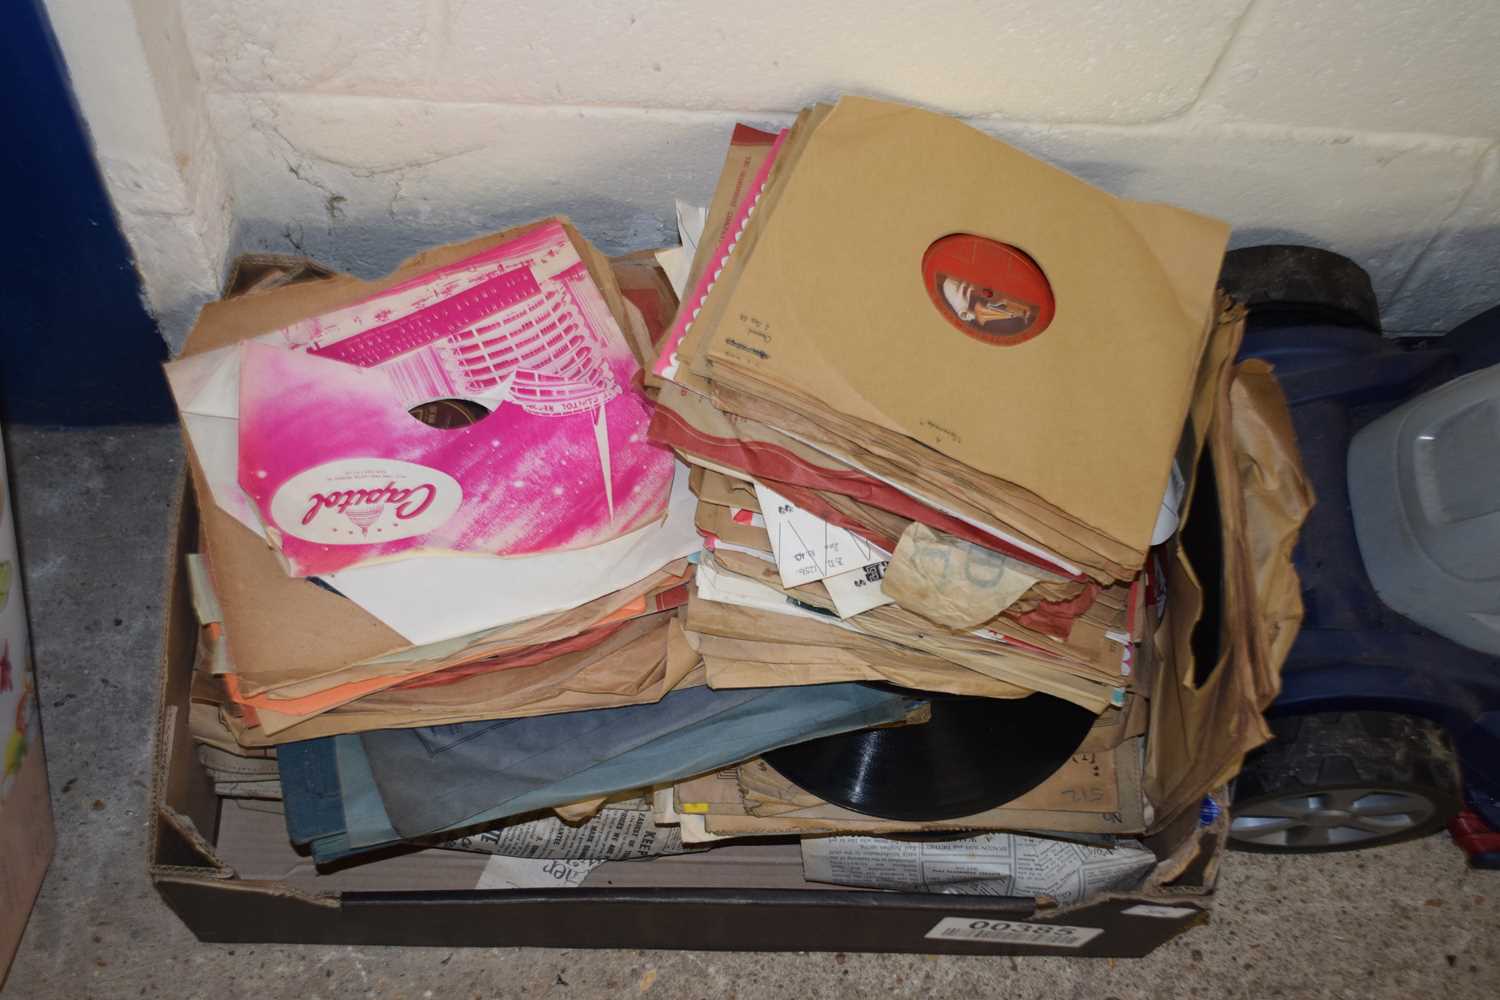 One box of various 78 rpm records